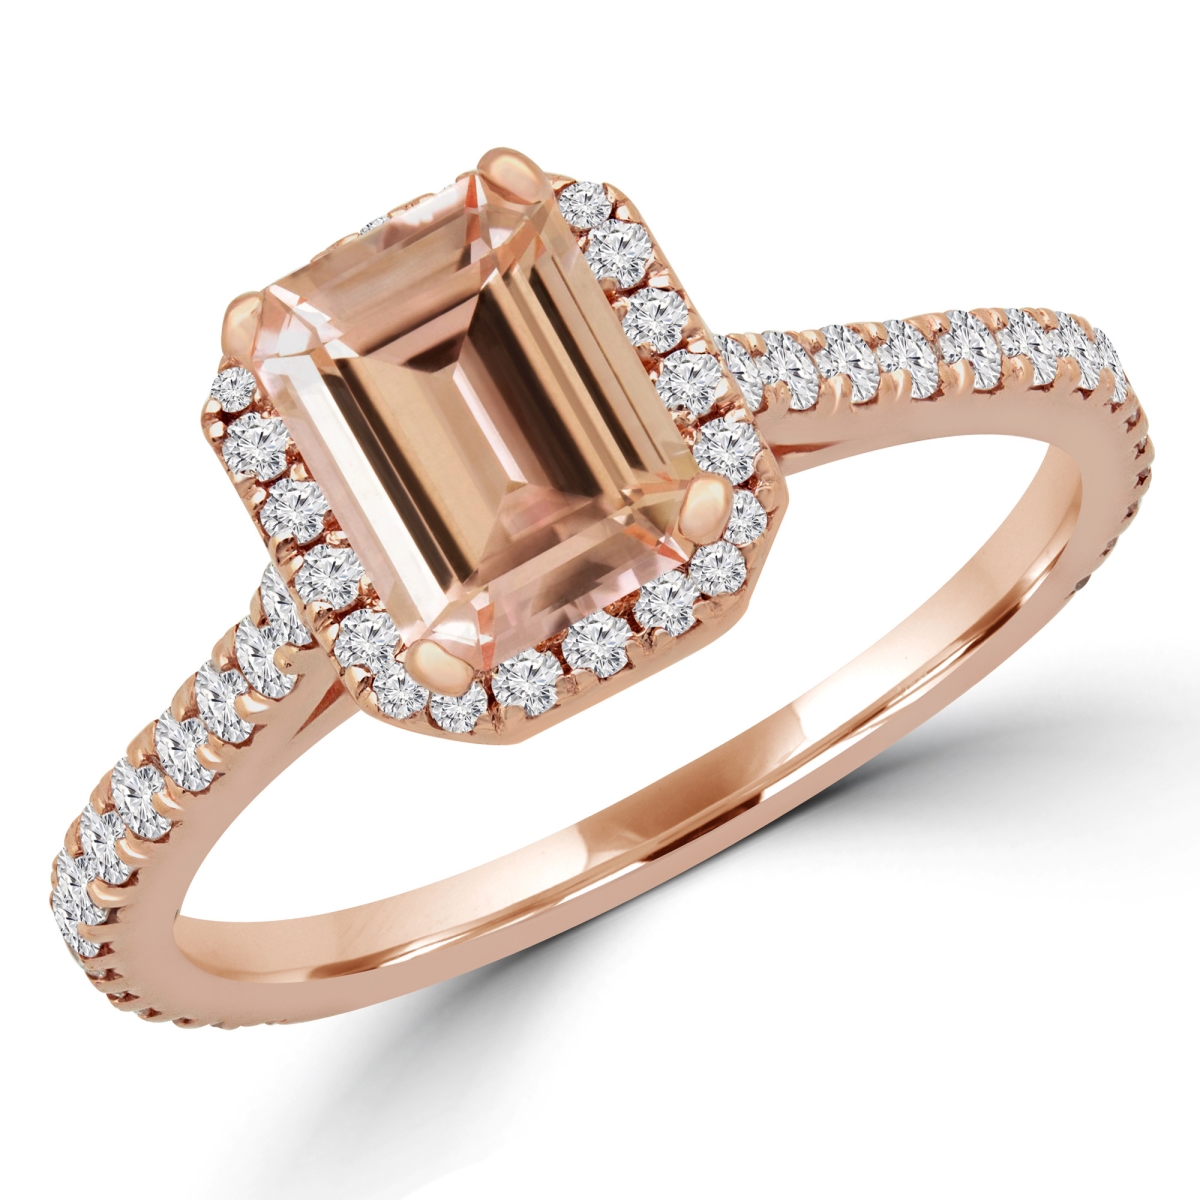 Picture of Majesty Diamonds MD180580-7 1.25 CTW Emerald Pink Morganite Halo Engagement Ring in 14K Rose Gold - Size 7